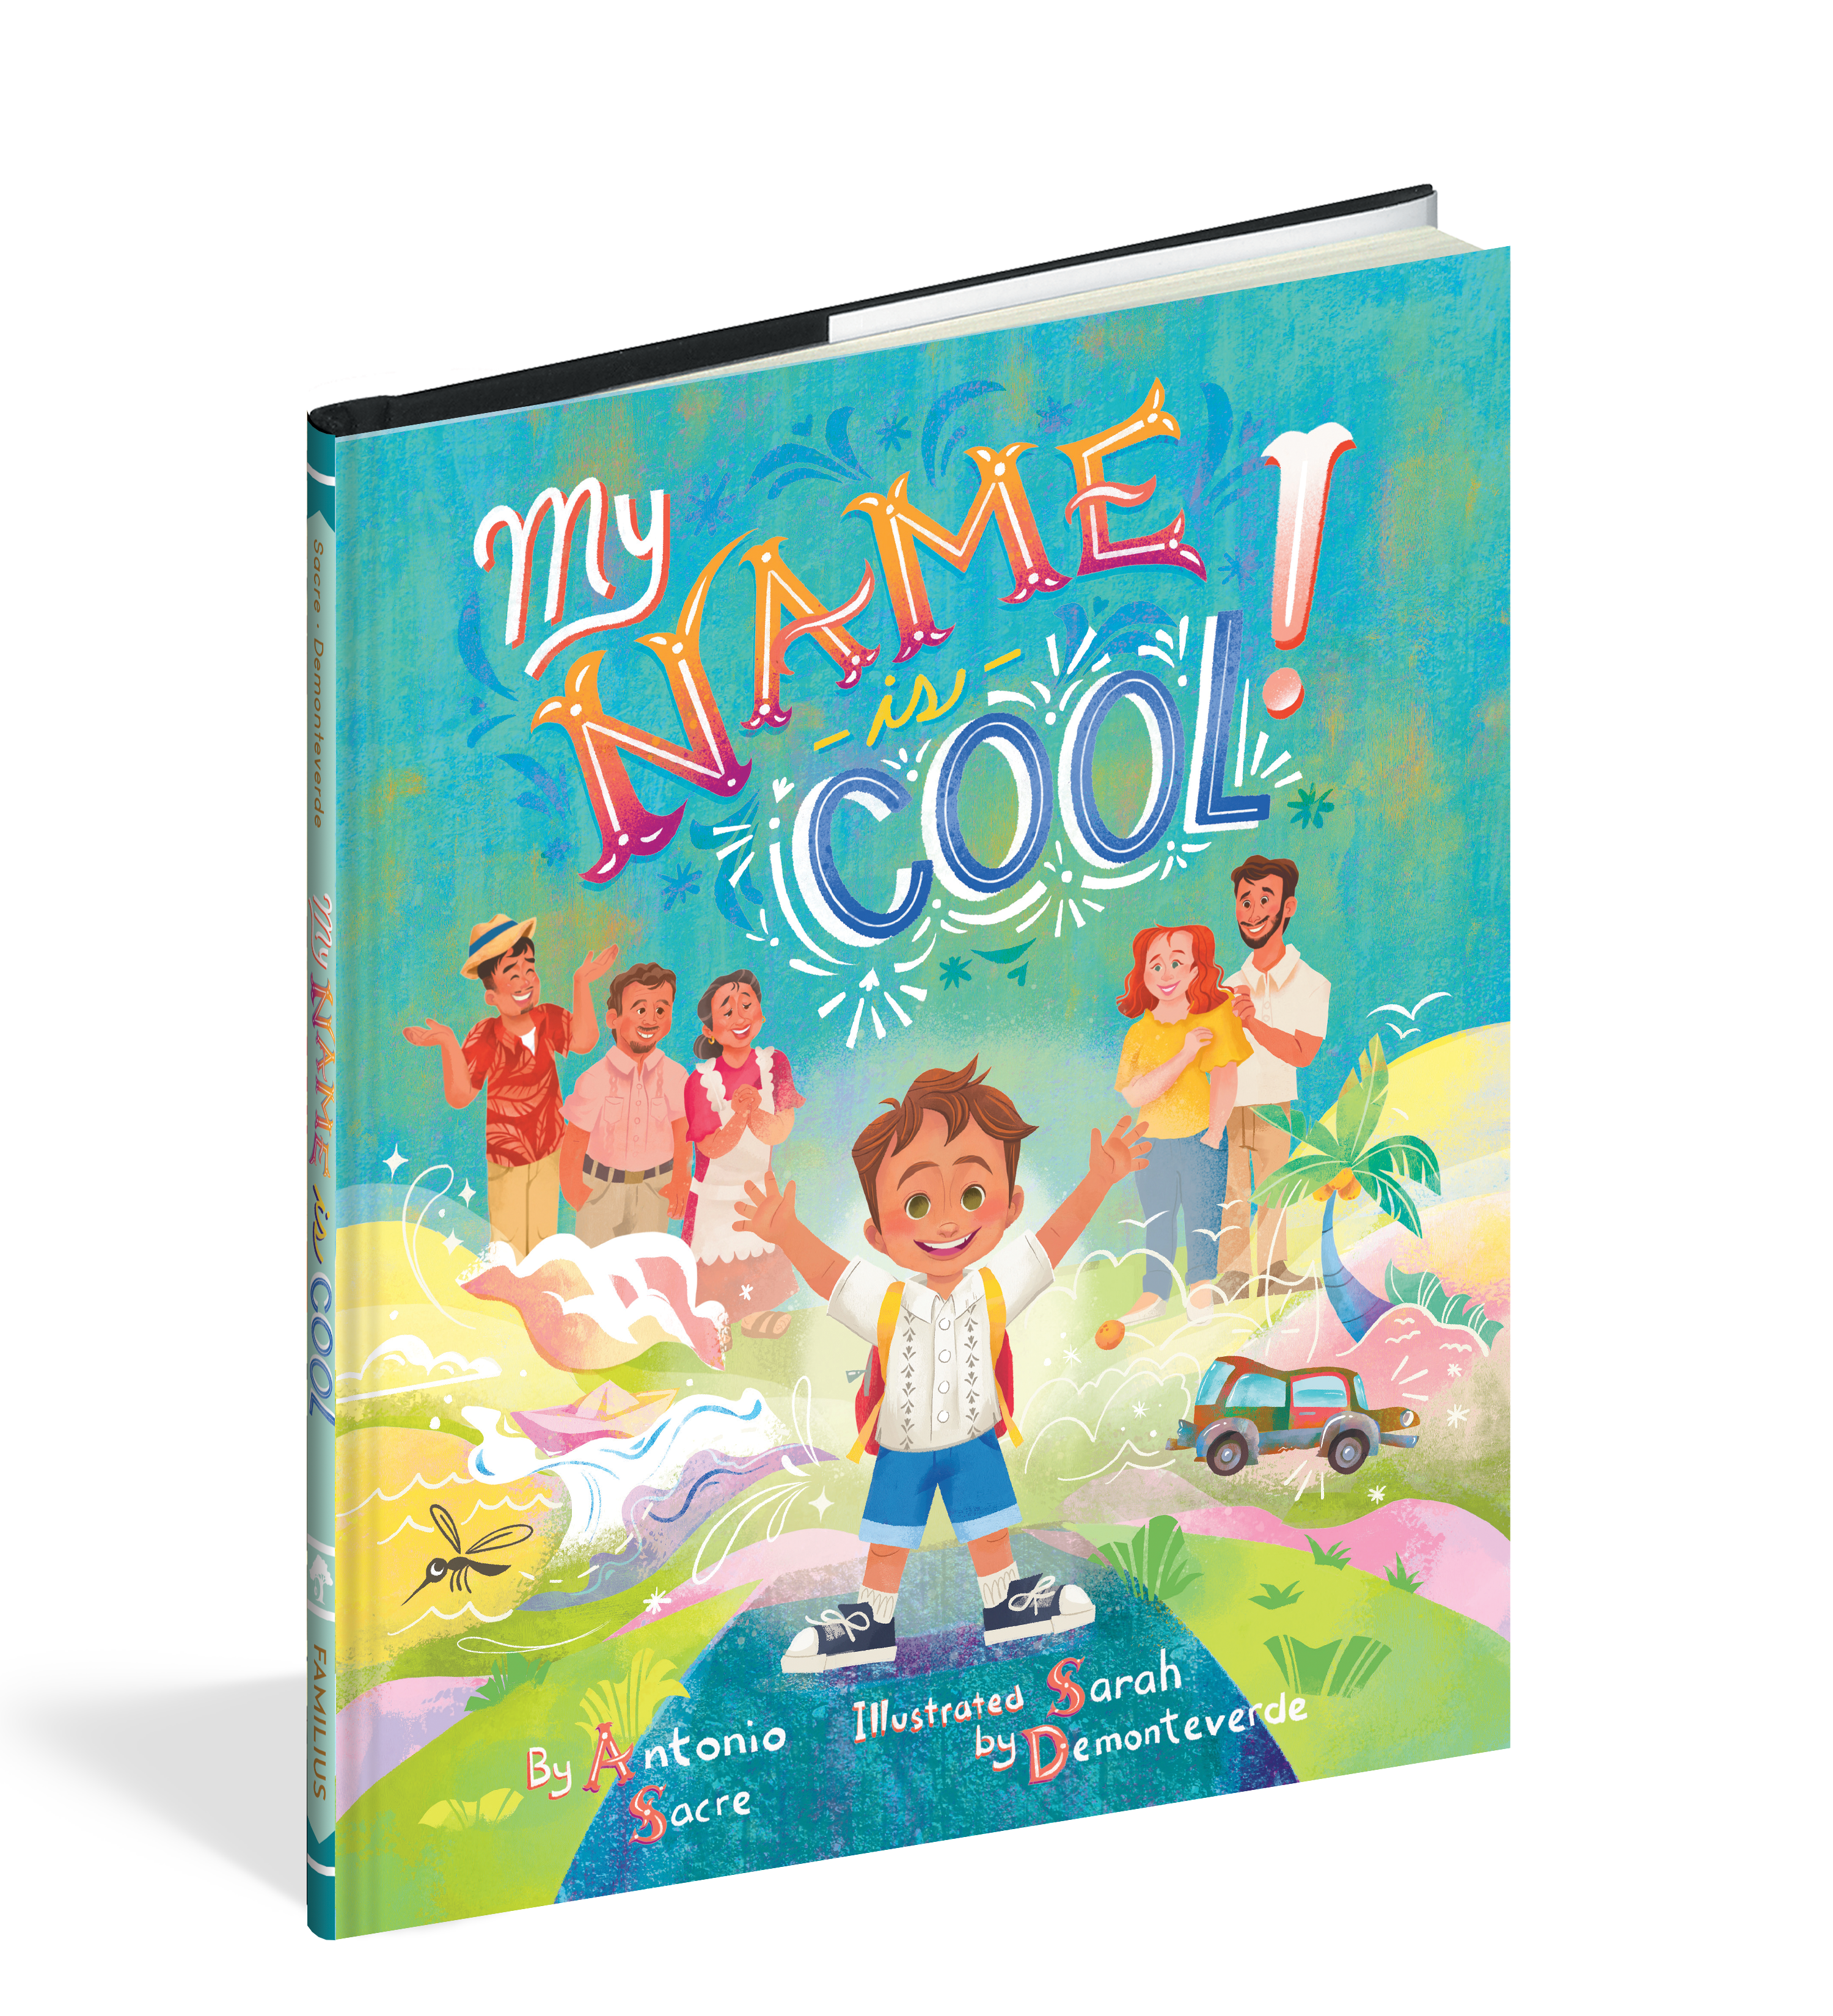 The cover of the picture book My Name Is Cool.